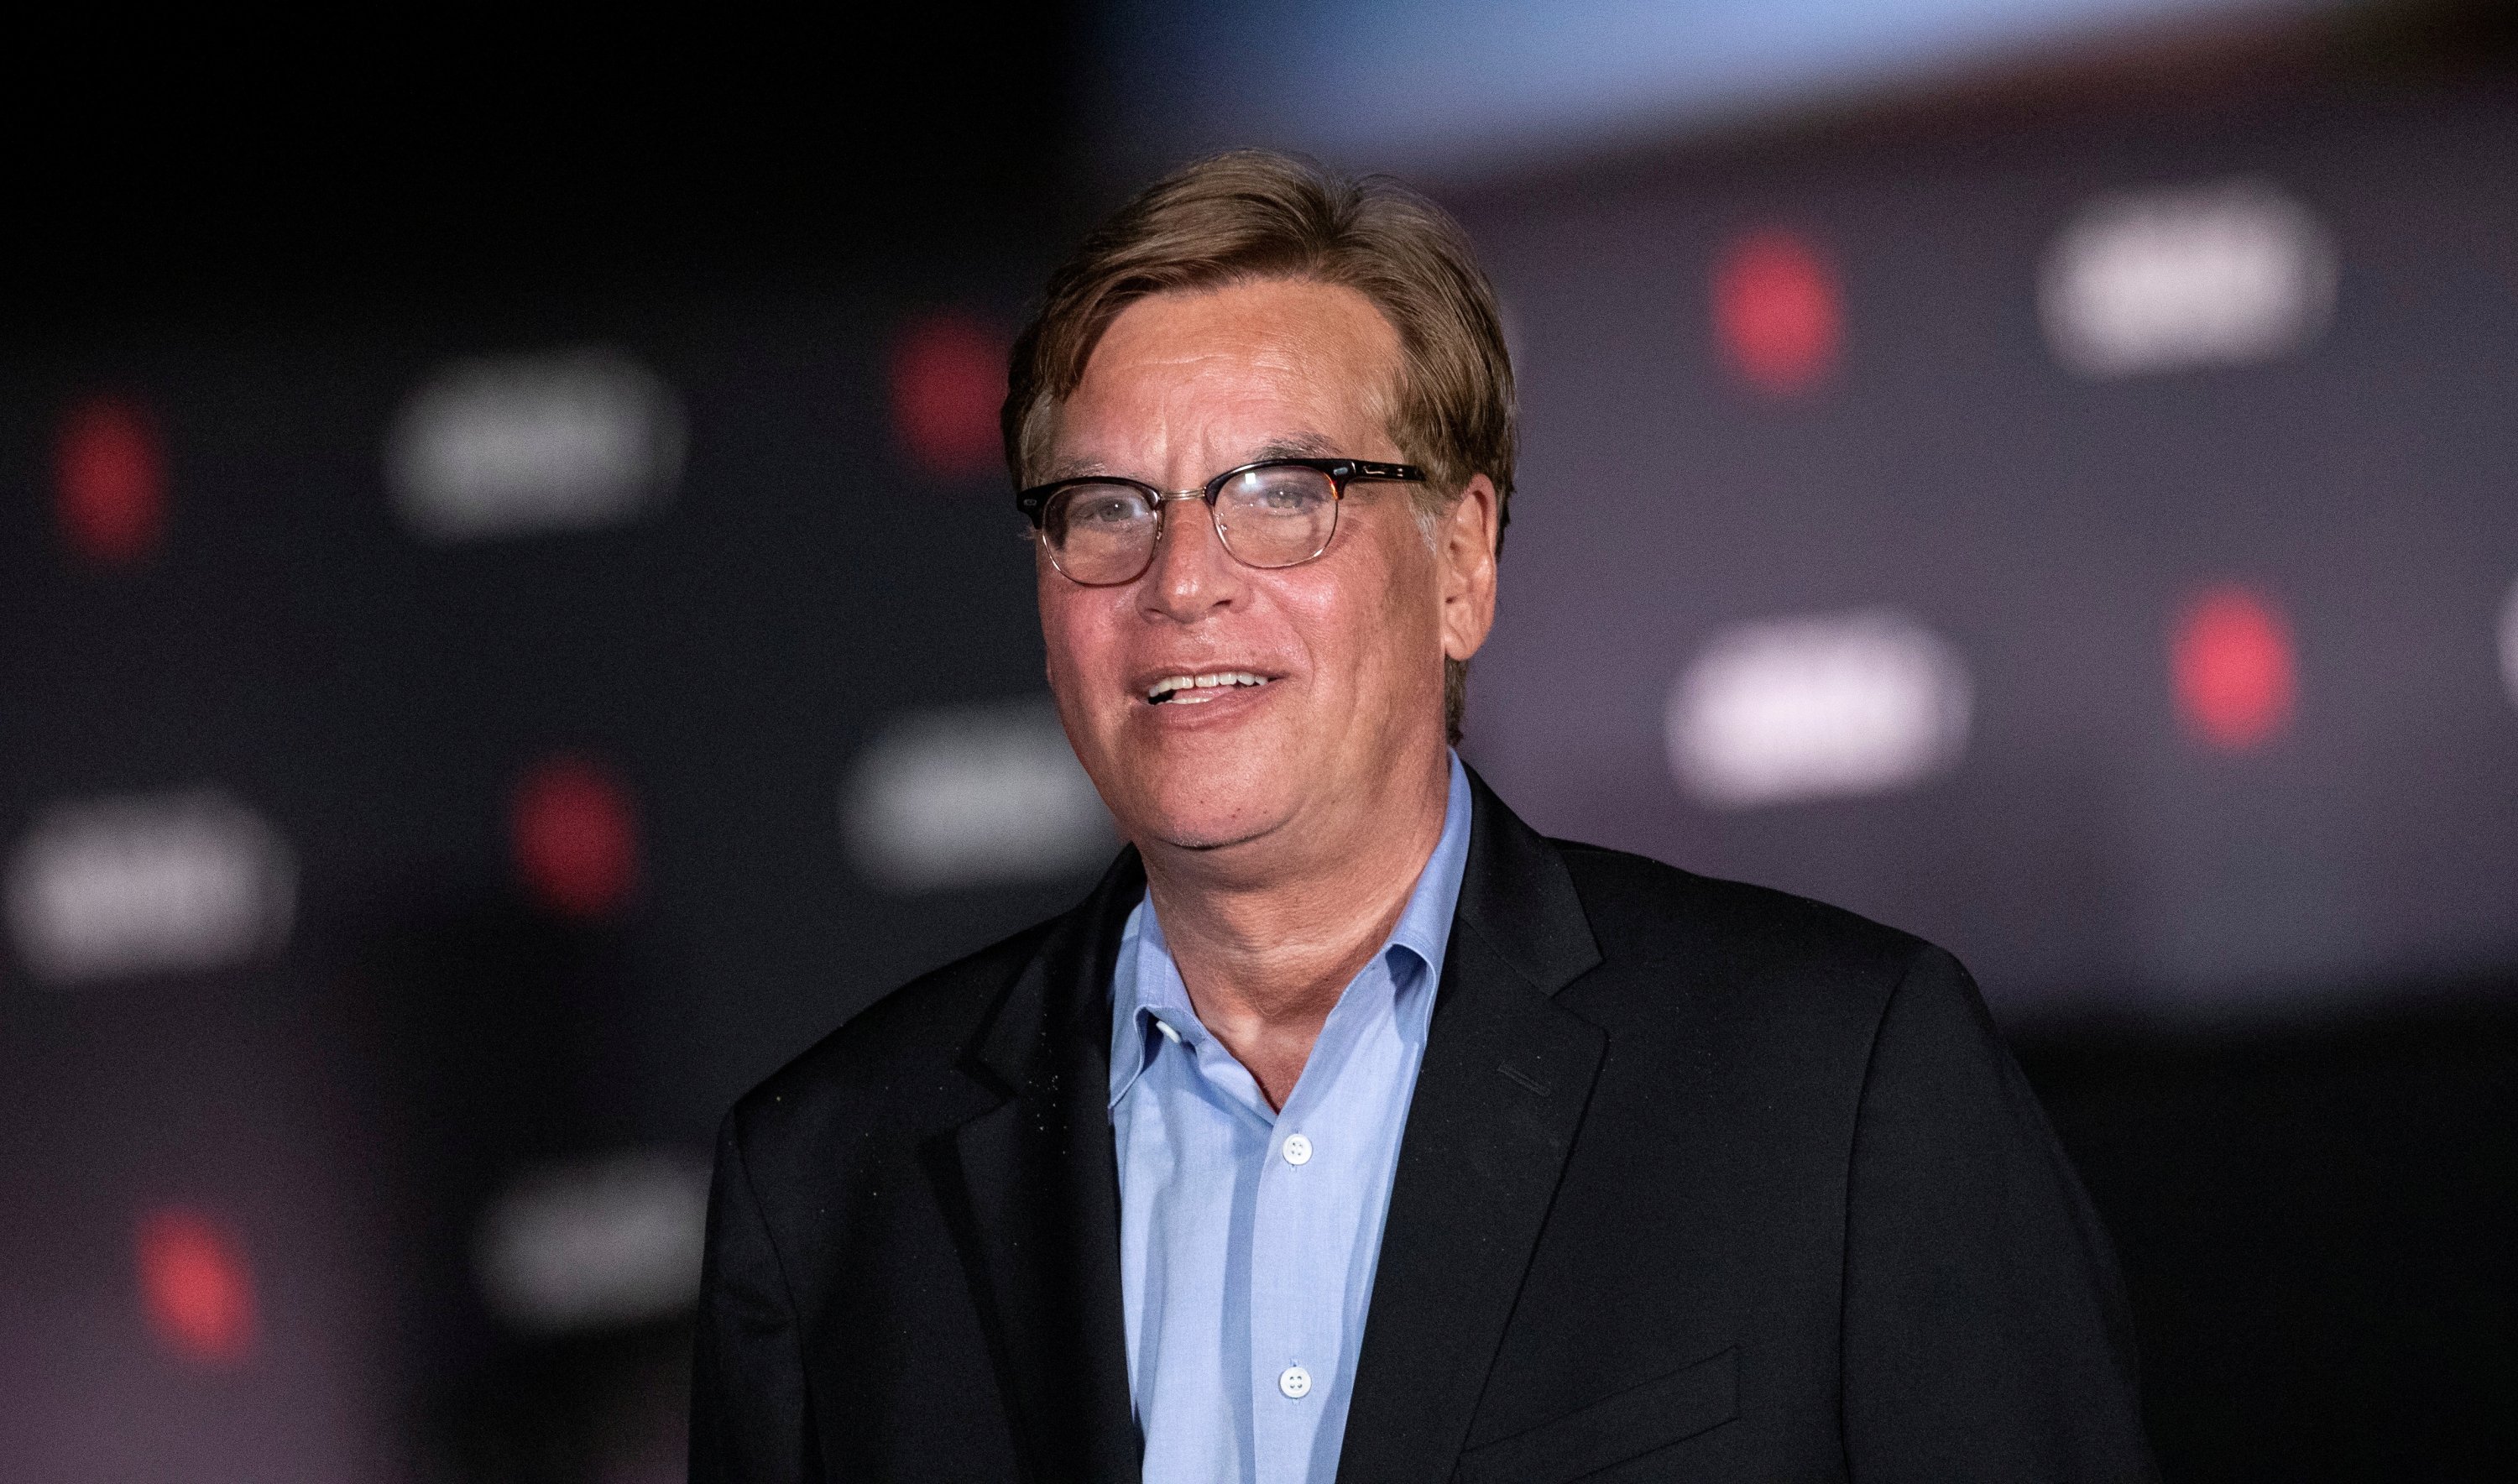 Director and writer of the movie Aaron Sorkin poses at a drive-in premiere for the film 'The Trial of the Chicago 7' at Rose Bowl in Pasadena, California, U.S., Oct. 13, 2020. (Reuters Photo)